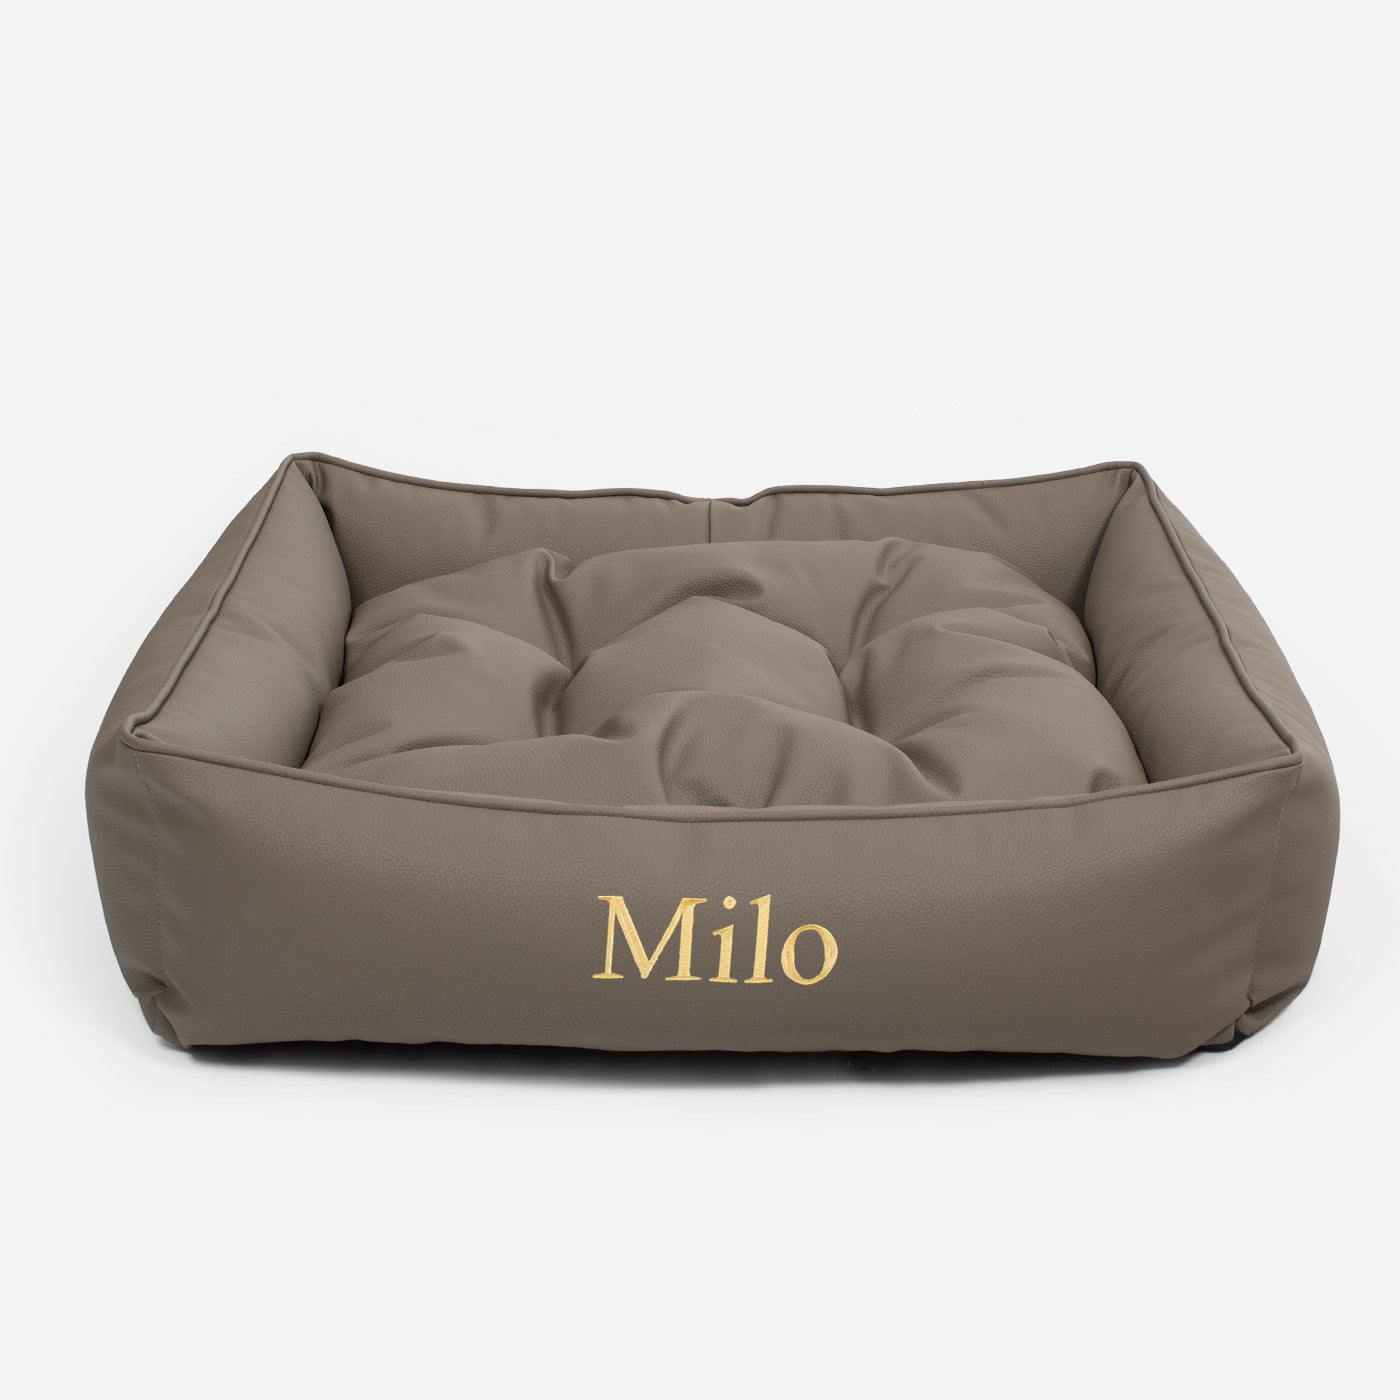 Luxury Handmade Box Bed in Rhino Tough Faux Leather, in Camel, Perfect For Your Pets Nap Time! Available To Personalise at Lords & Labradors